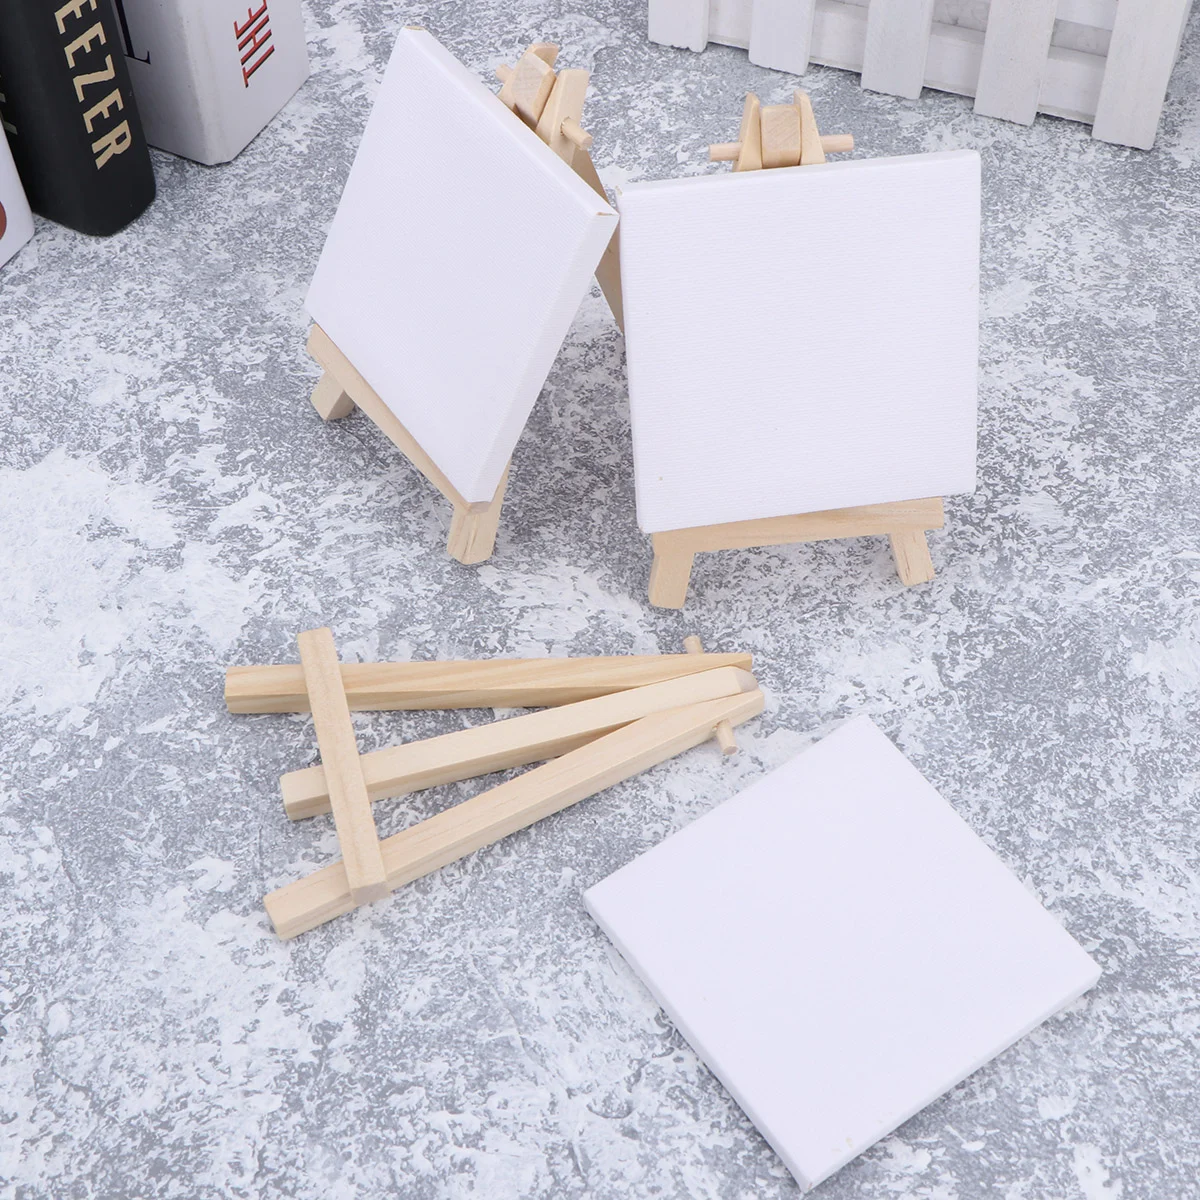 

10 PCS Painting Craft Drawing Decoration Sketchpad Settings Easel Kids Decorate Mini Canvas Panel Wooden Child Artistic